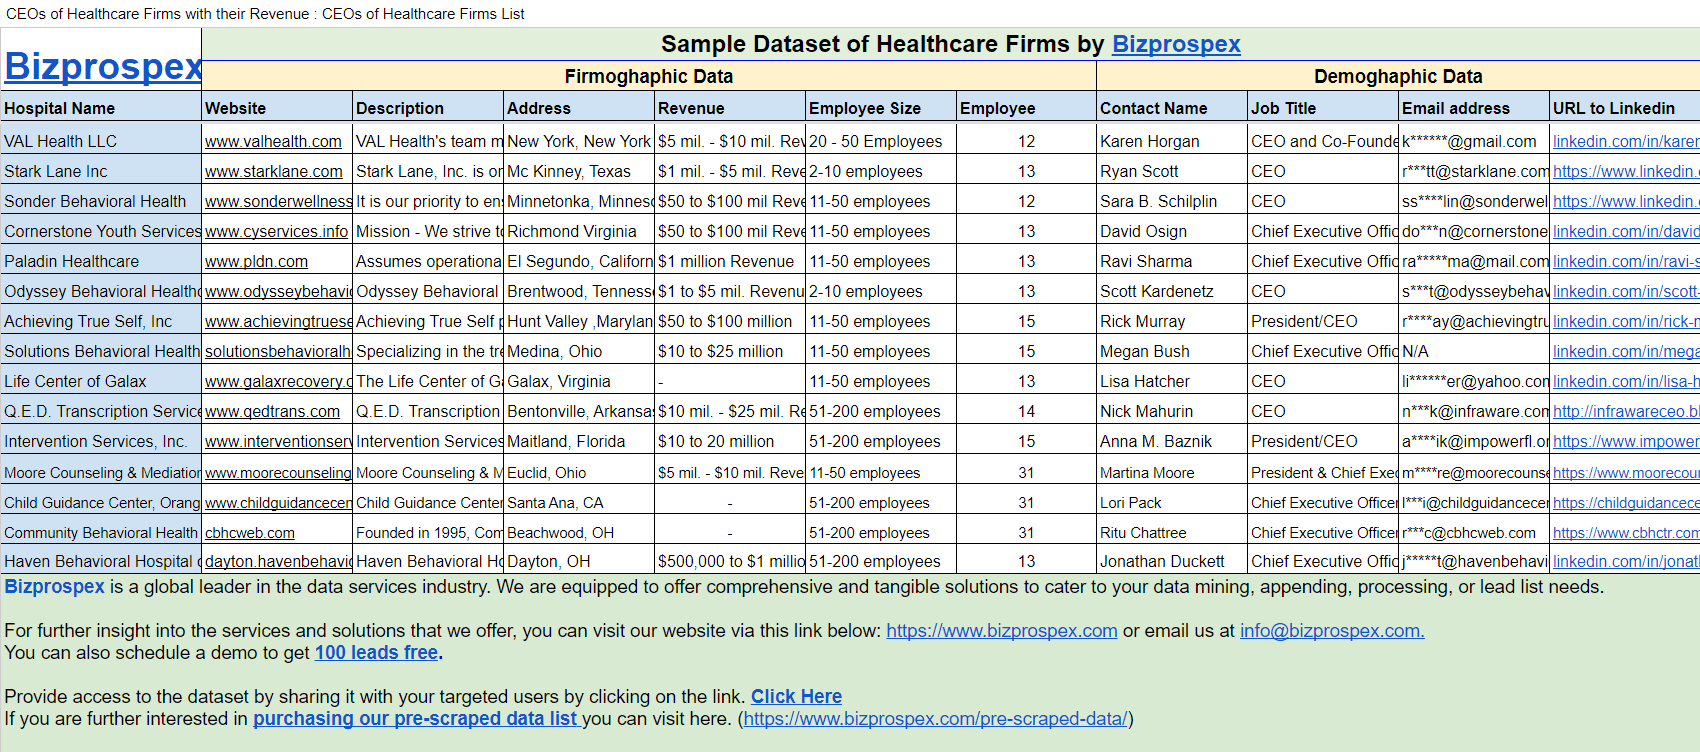 CEOs-of-Healthcare-Firms-with-their-Revenue